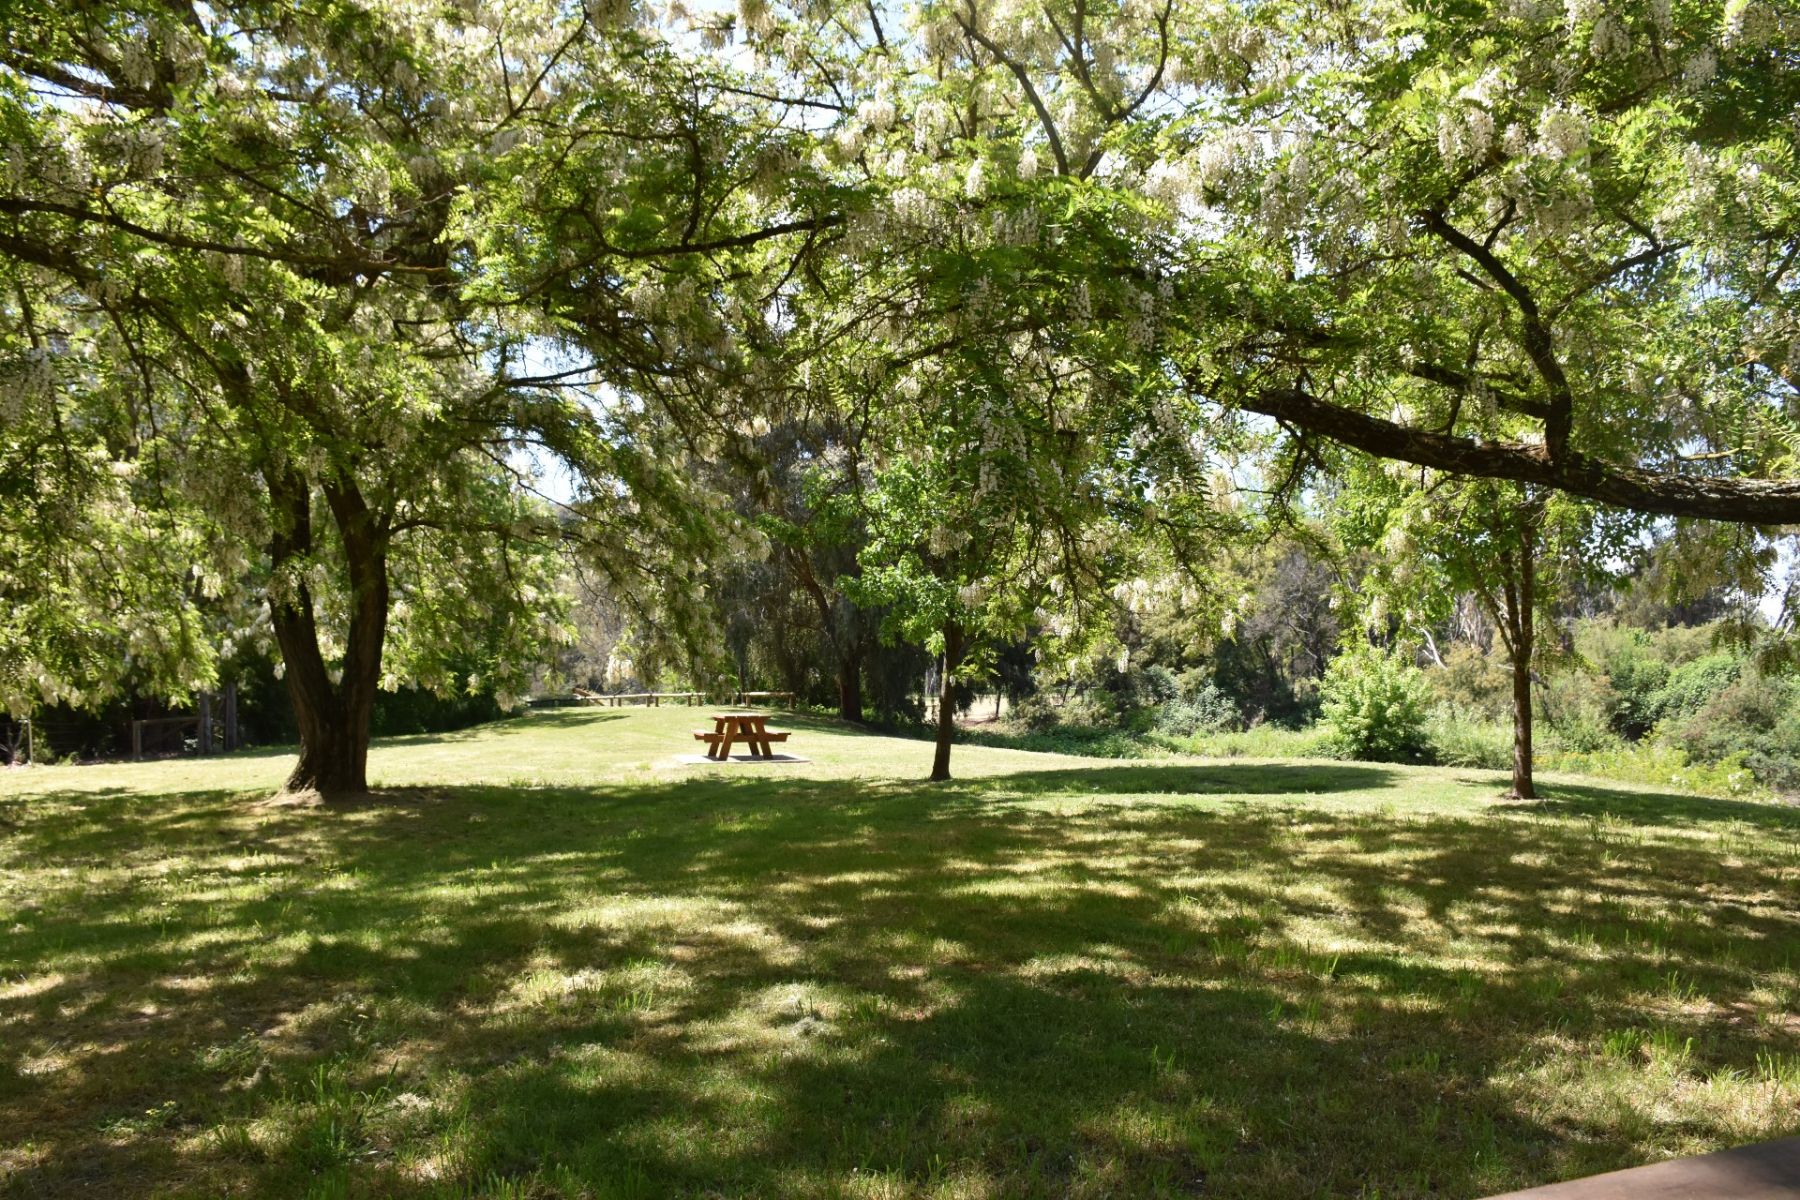 A picnic table in a grassy reserve with large trees providing shade